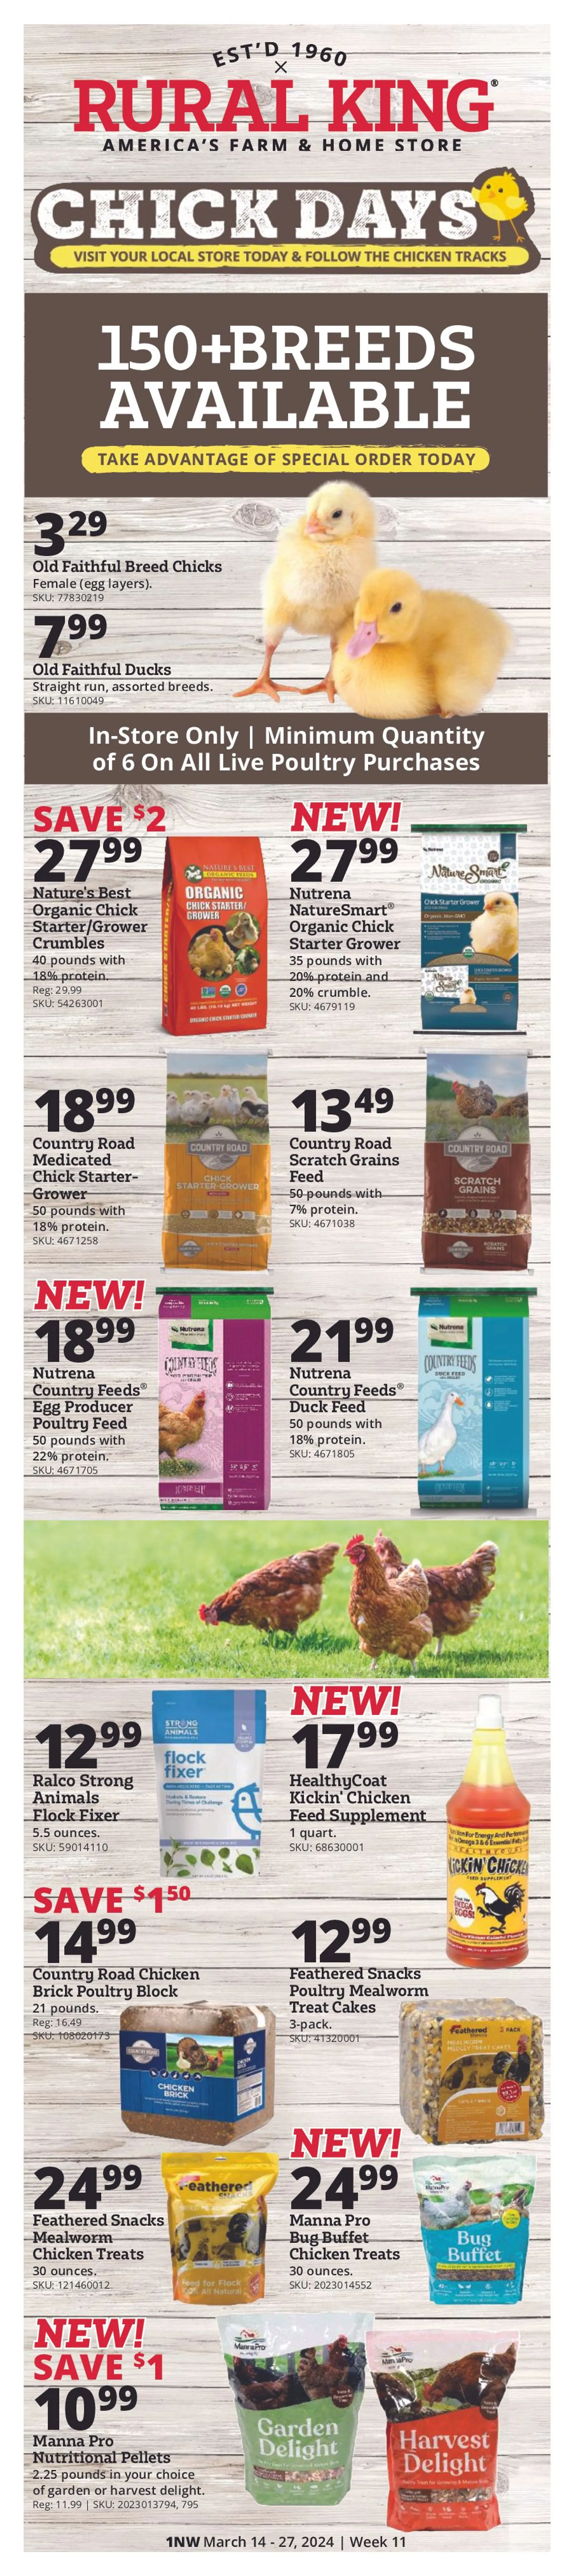 Weekly ad RURAL KING SPECIAL DEAL from March 14 to March 27 2024 - Page 1